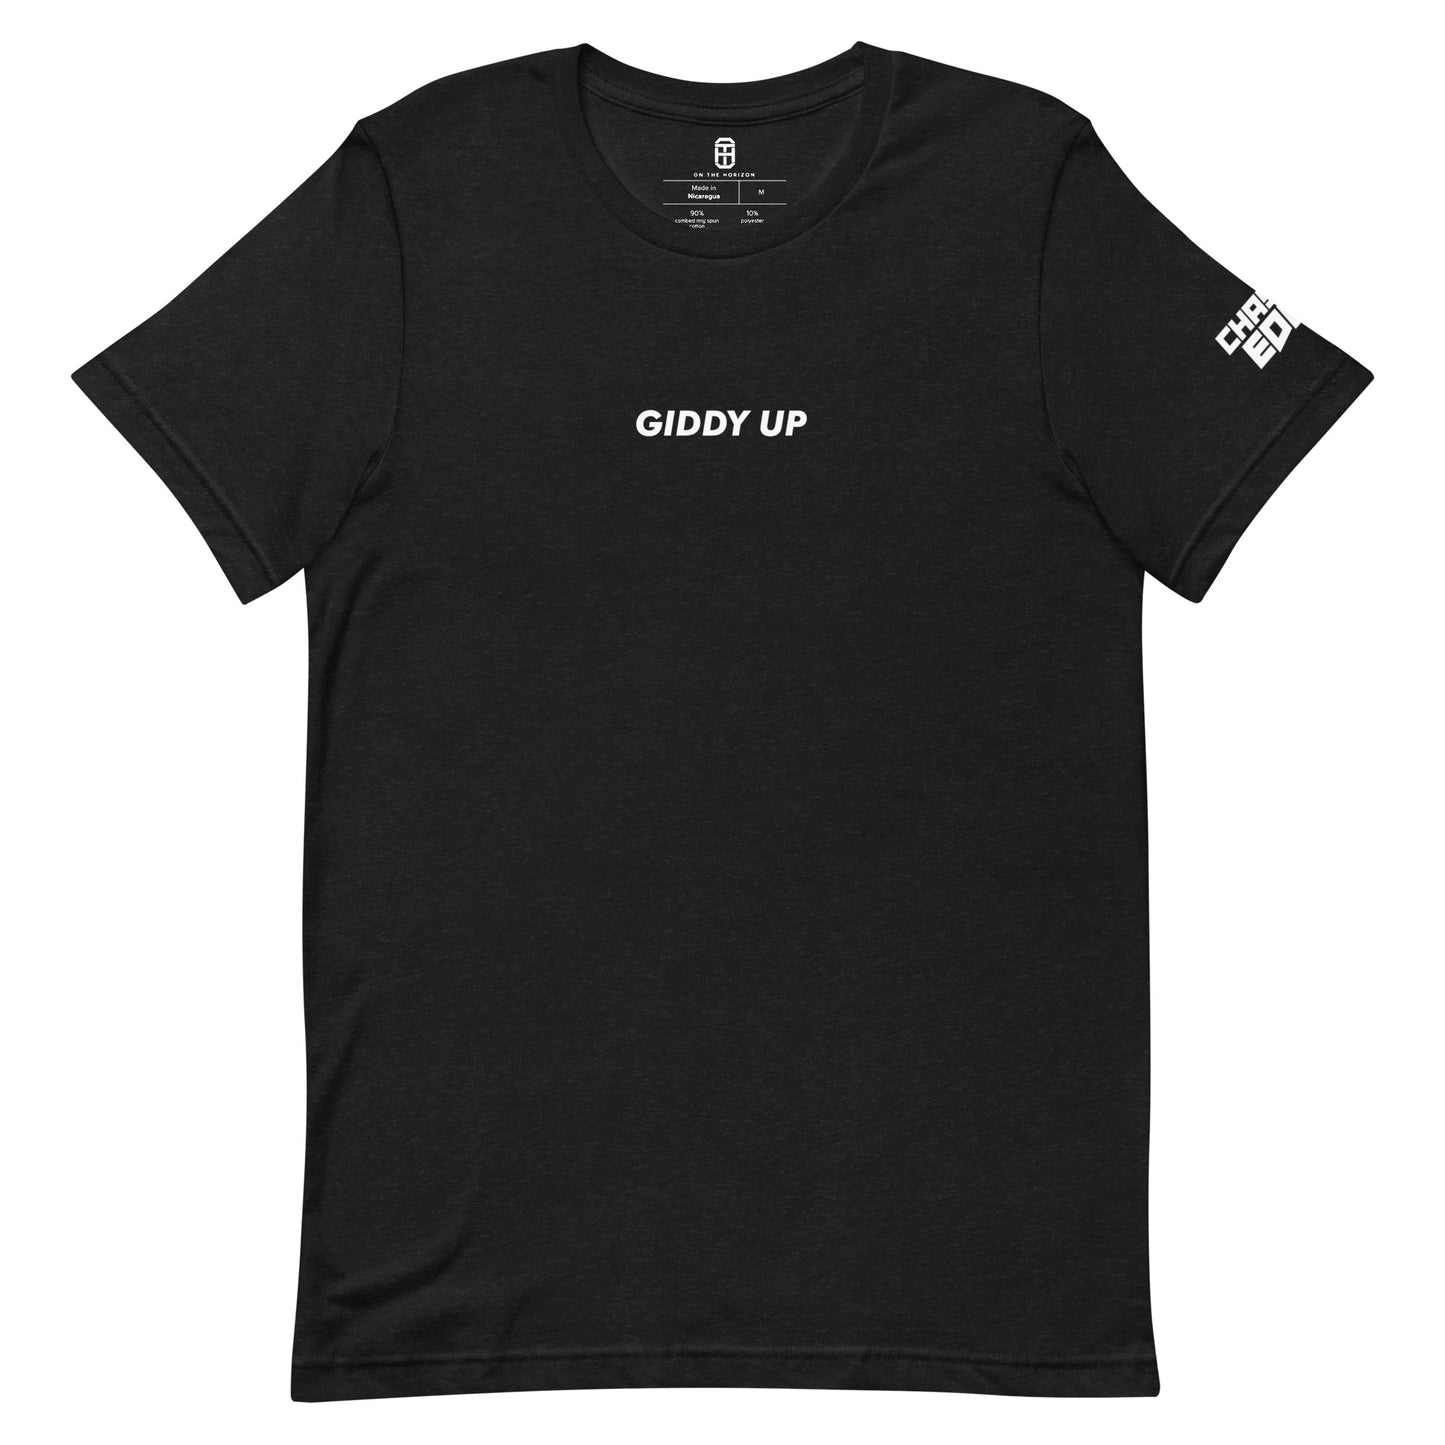 CHASING EDGES GIDDY UP SLIM FIT T-SHIRT (MORE COLORS)